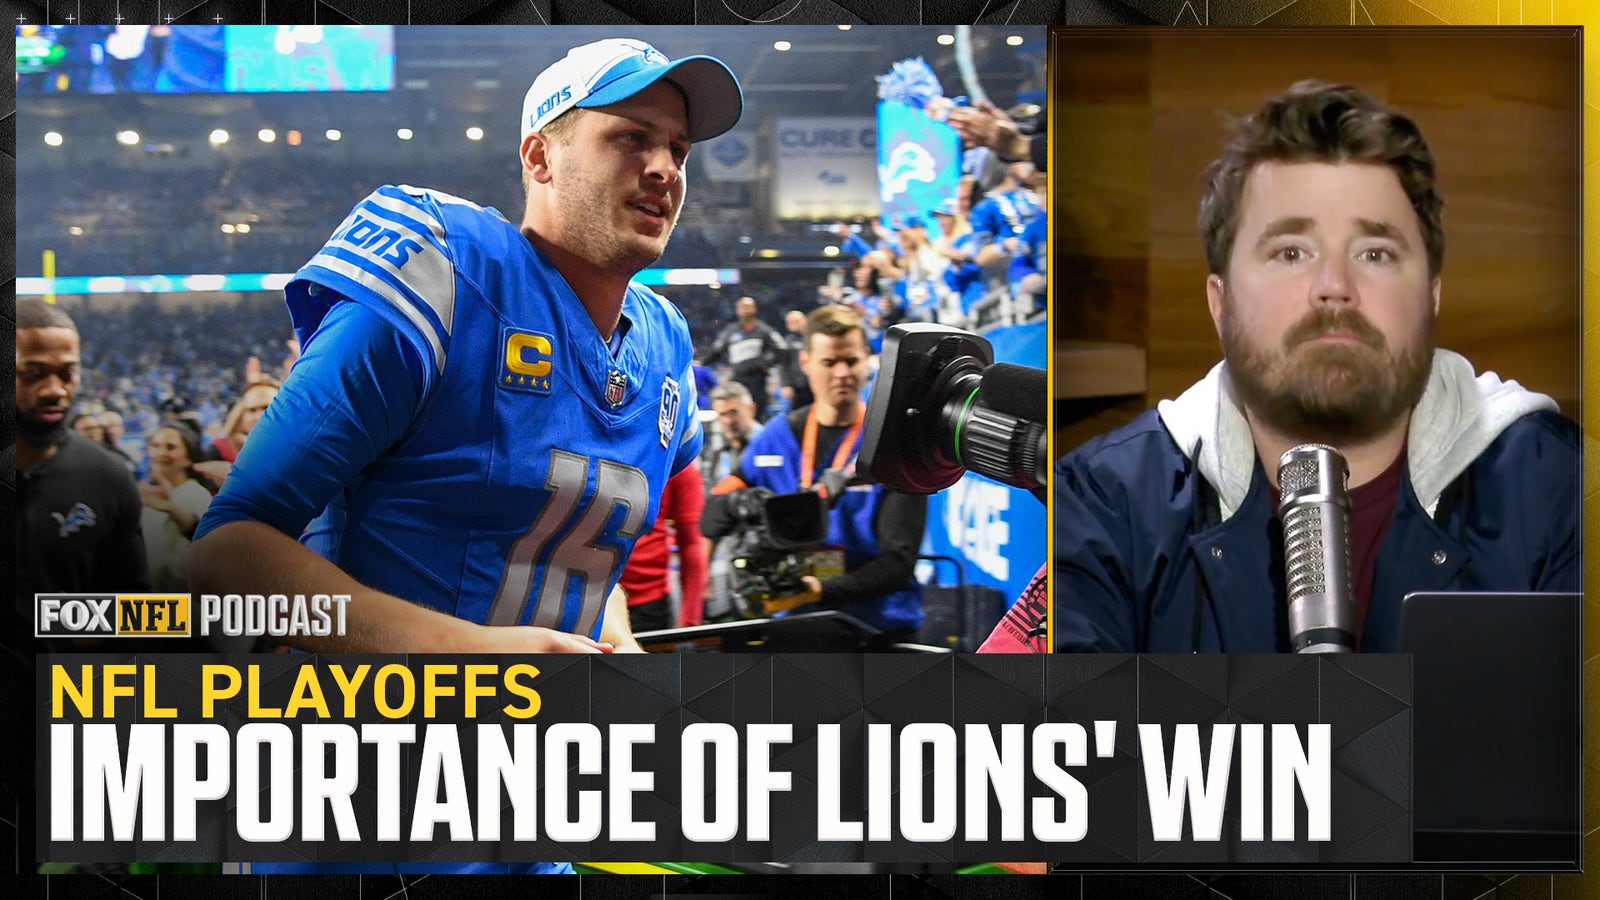  How significant was the Detroit Lions' win for Jared Goff, Dan Campbell?